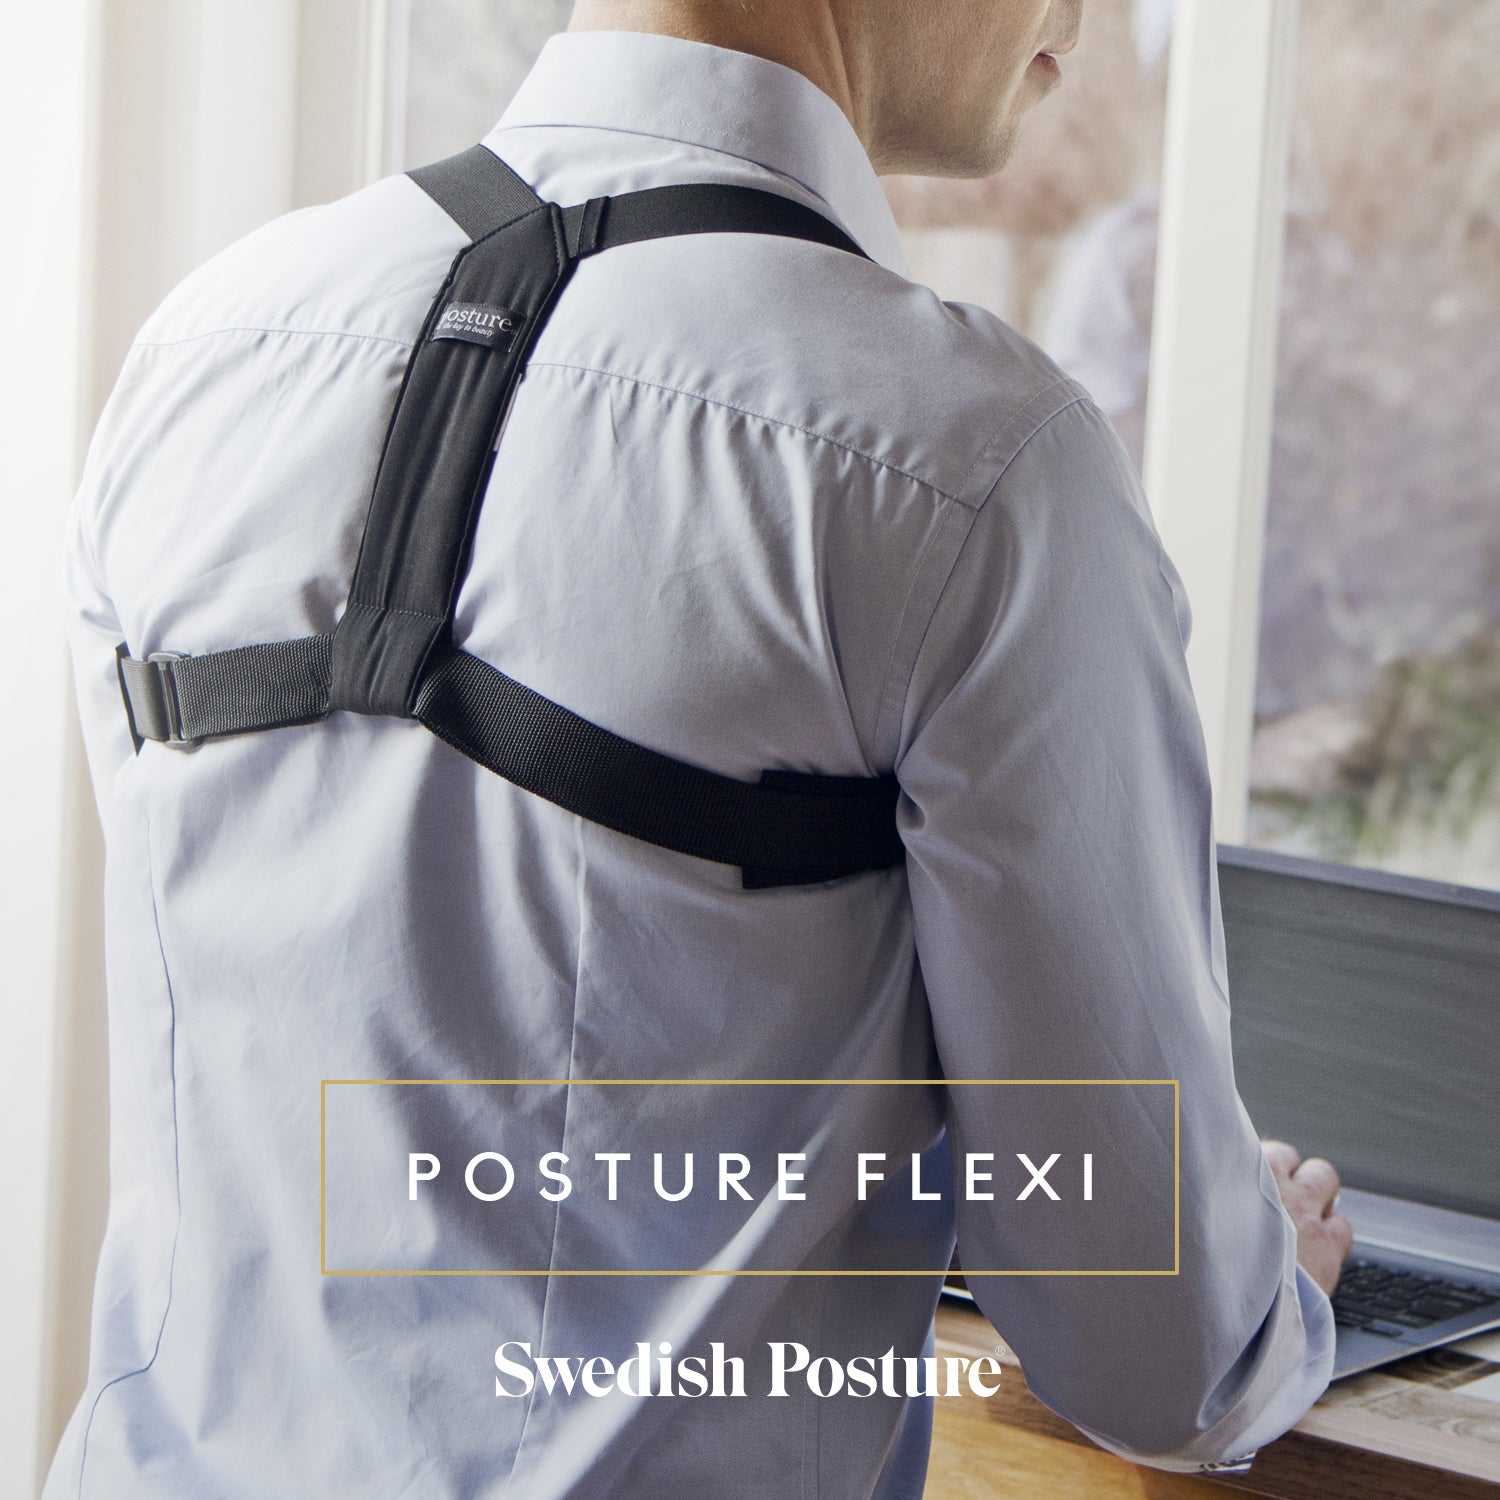 Shop products for a better posture, Improve posture